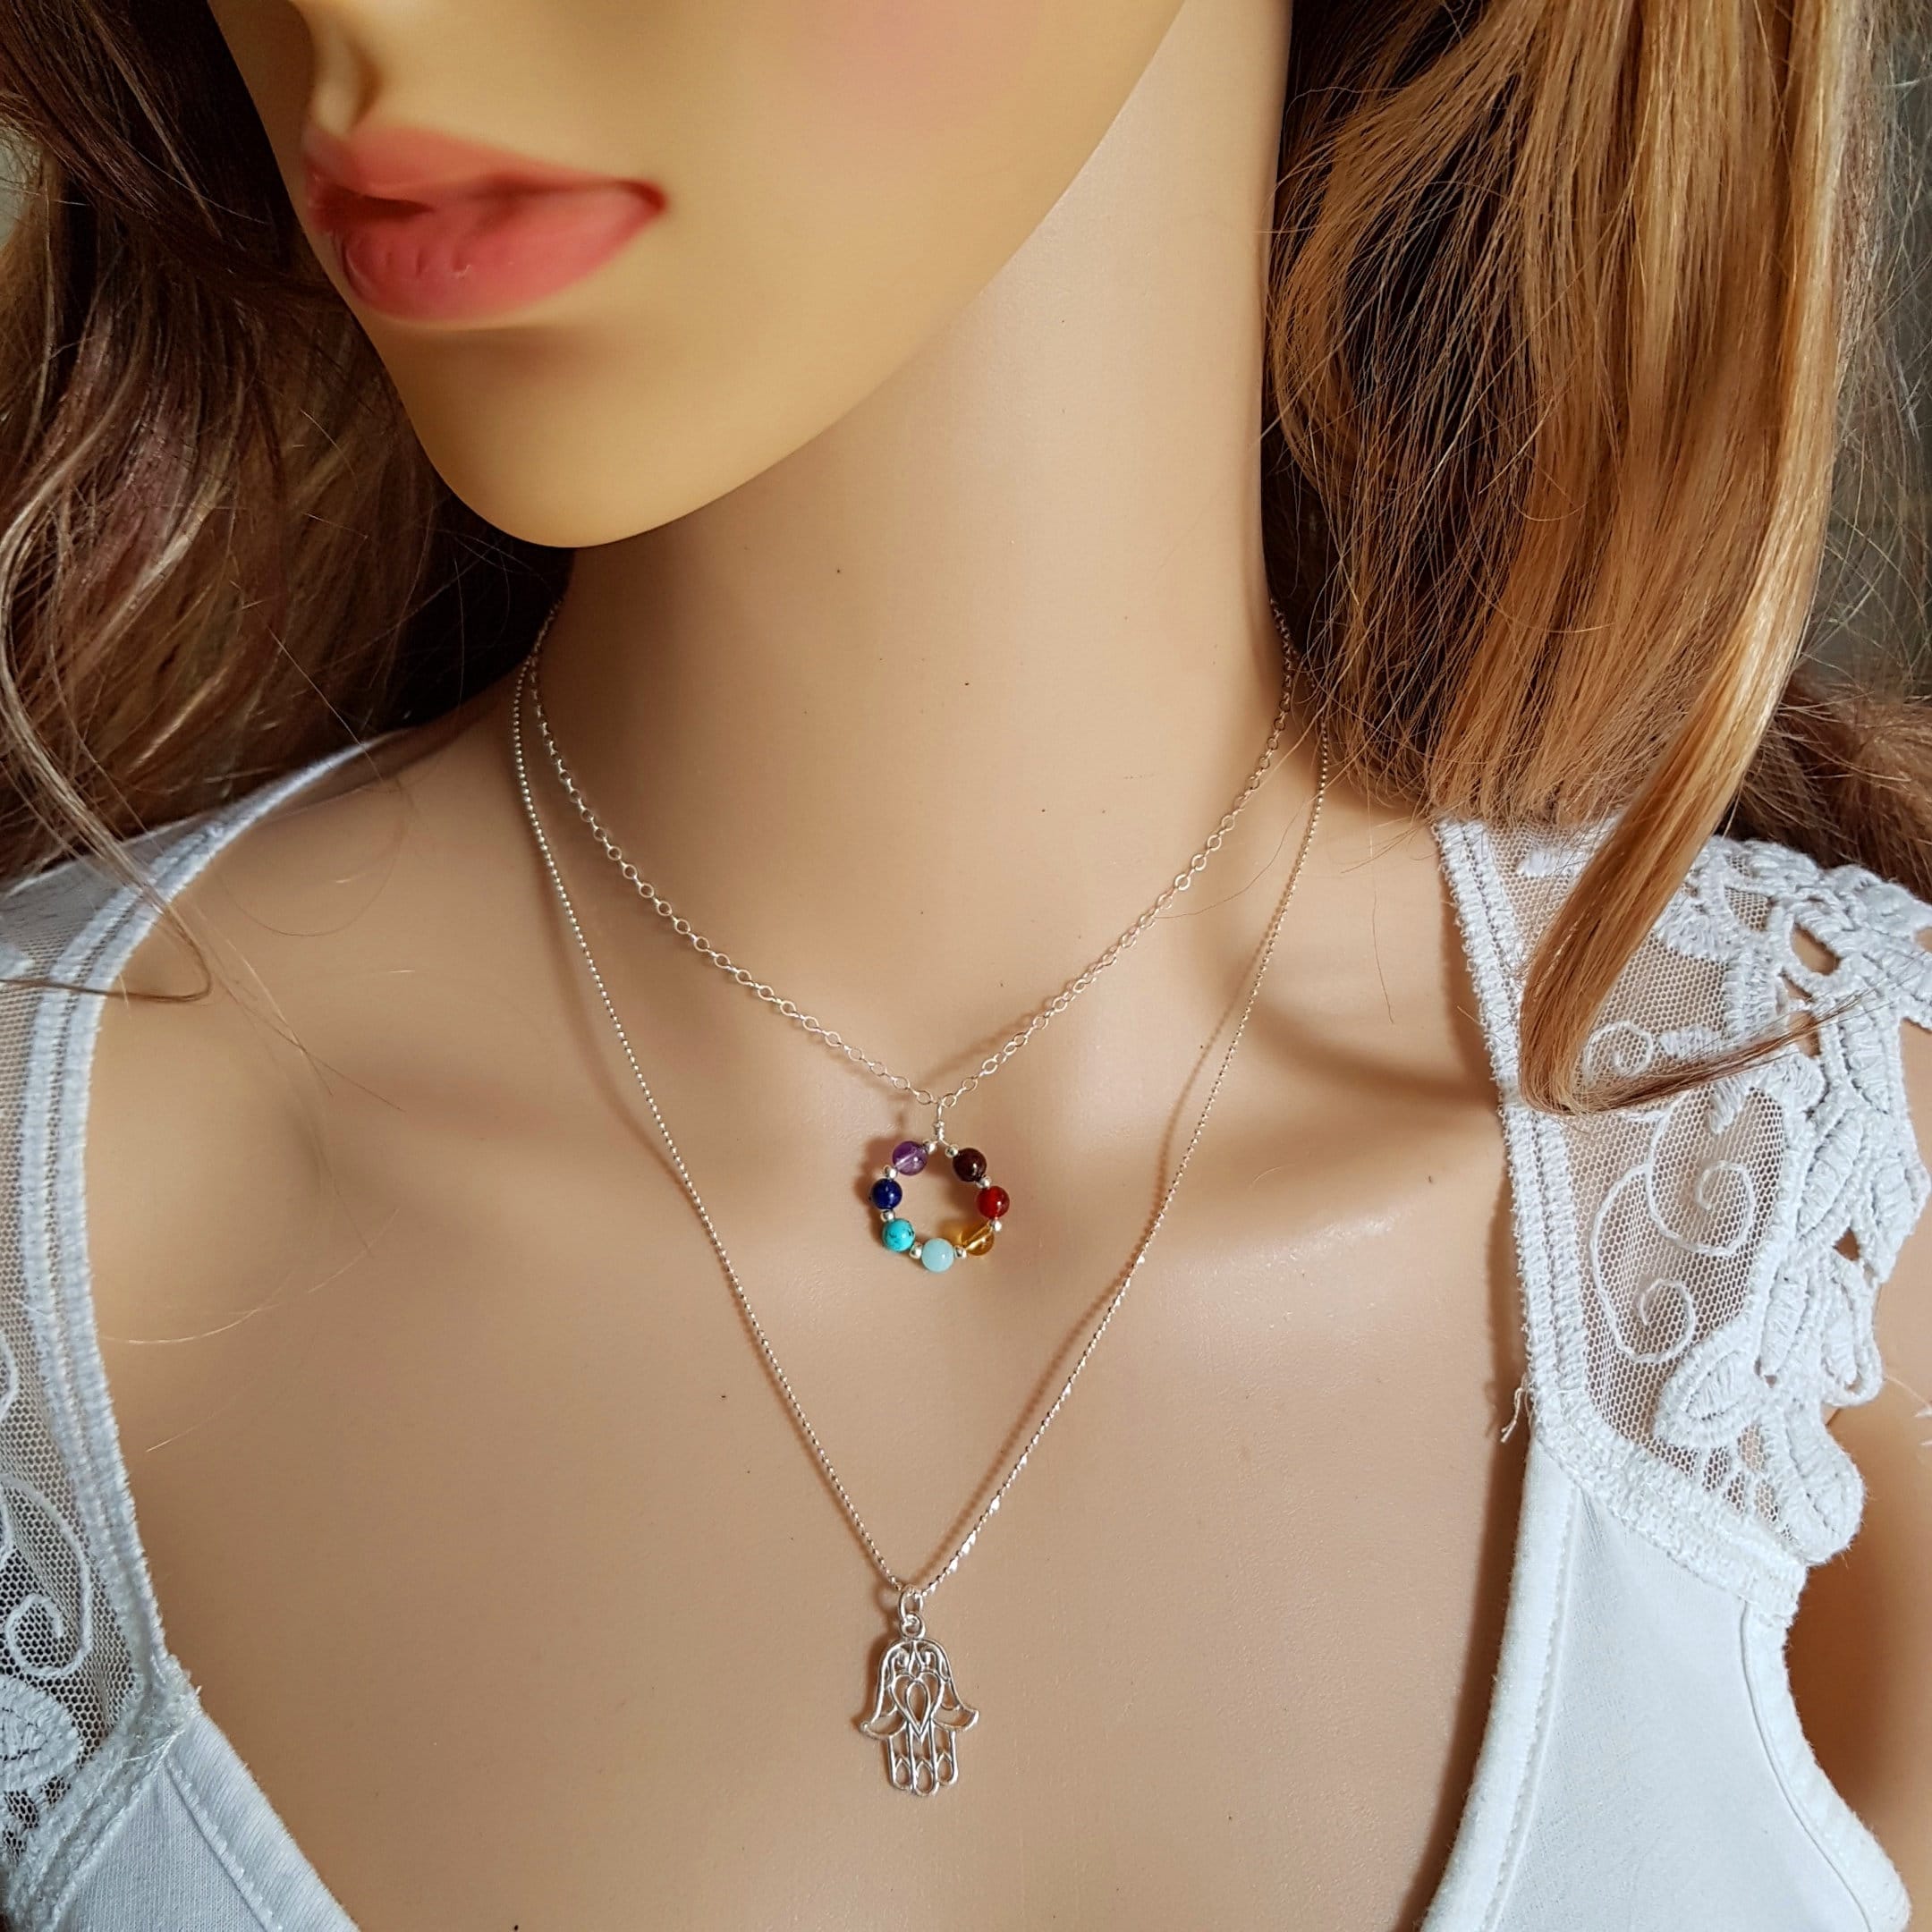 boho necklace for woman short dainty necklace gold gift for woman colorful boho jewelry 7 chakra jewelry Raw gemstones chakra necklace